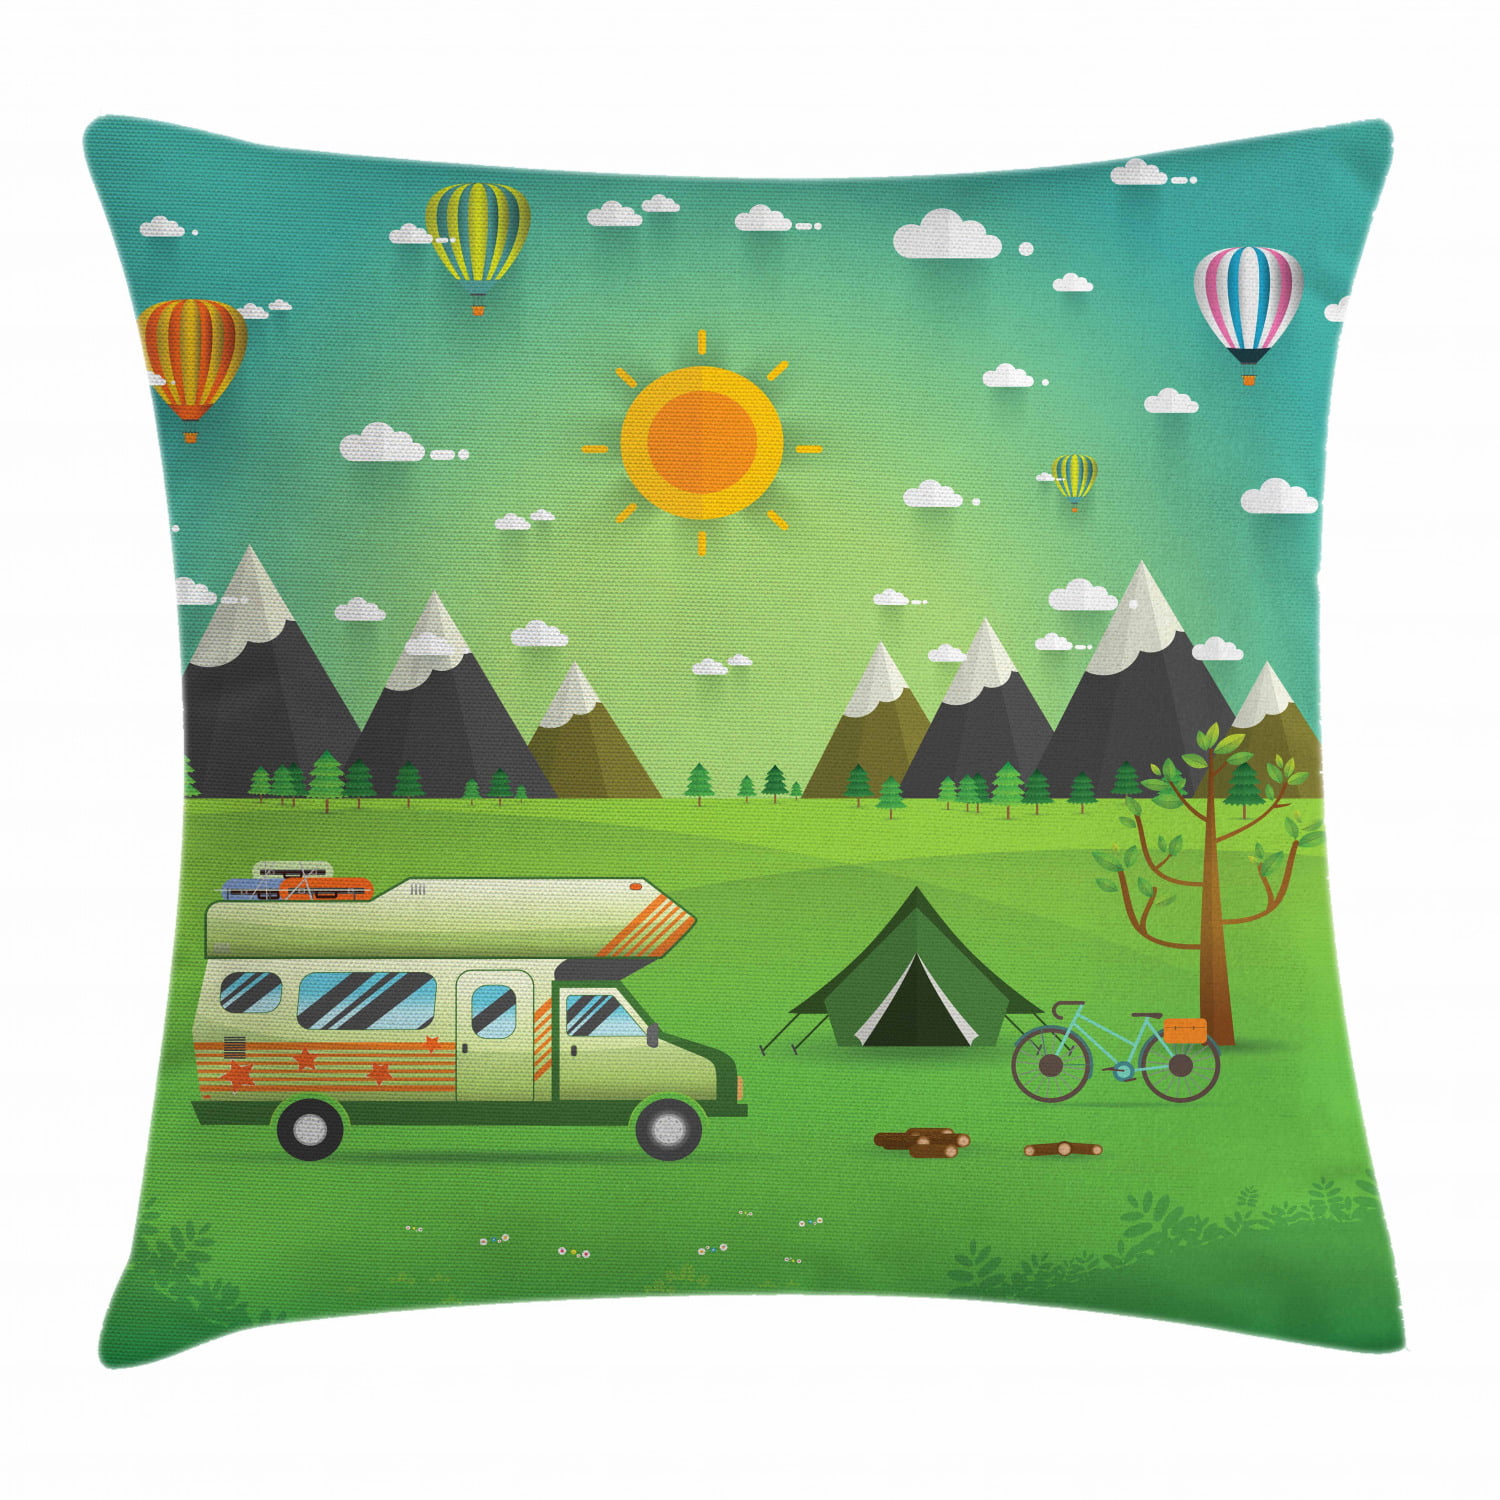 Cartoon Bus Cushion Cover Home Decor Happy Campers Decorative Throw Pillow Cover